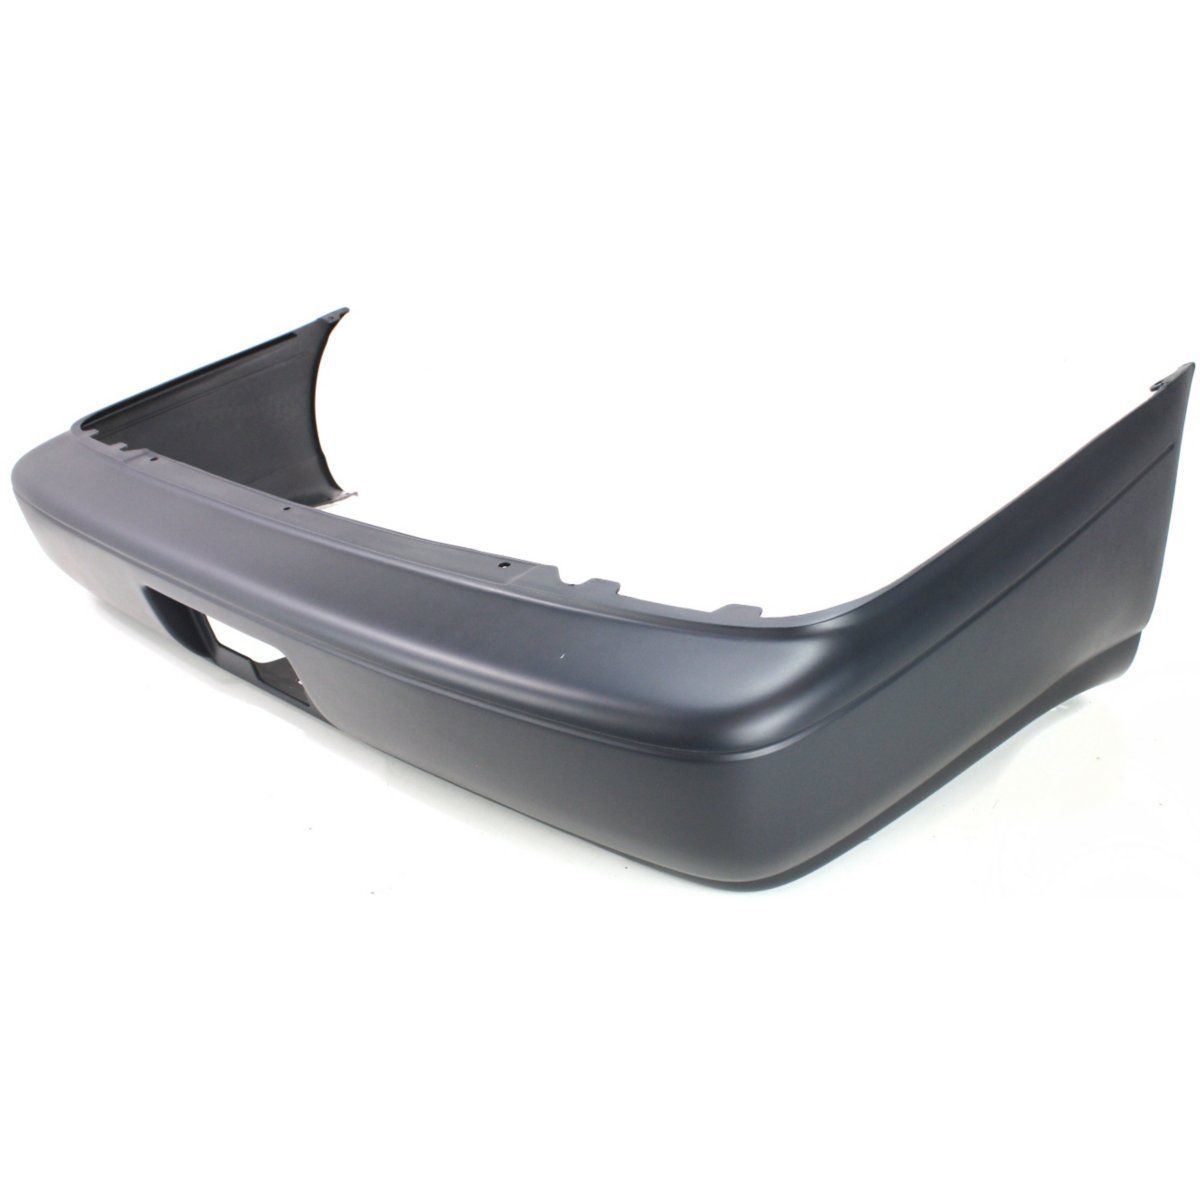 1993-1997 TOYOTA COROLLA Rear Bumper Cover 4dr sedan Painted to Match